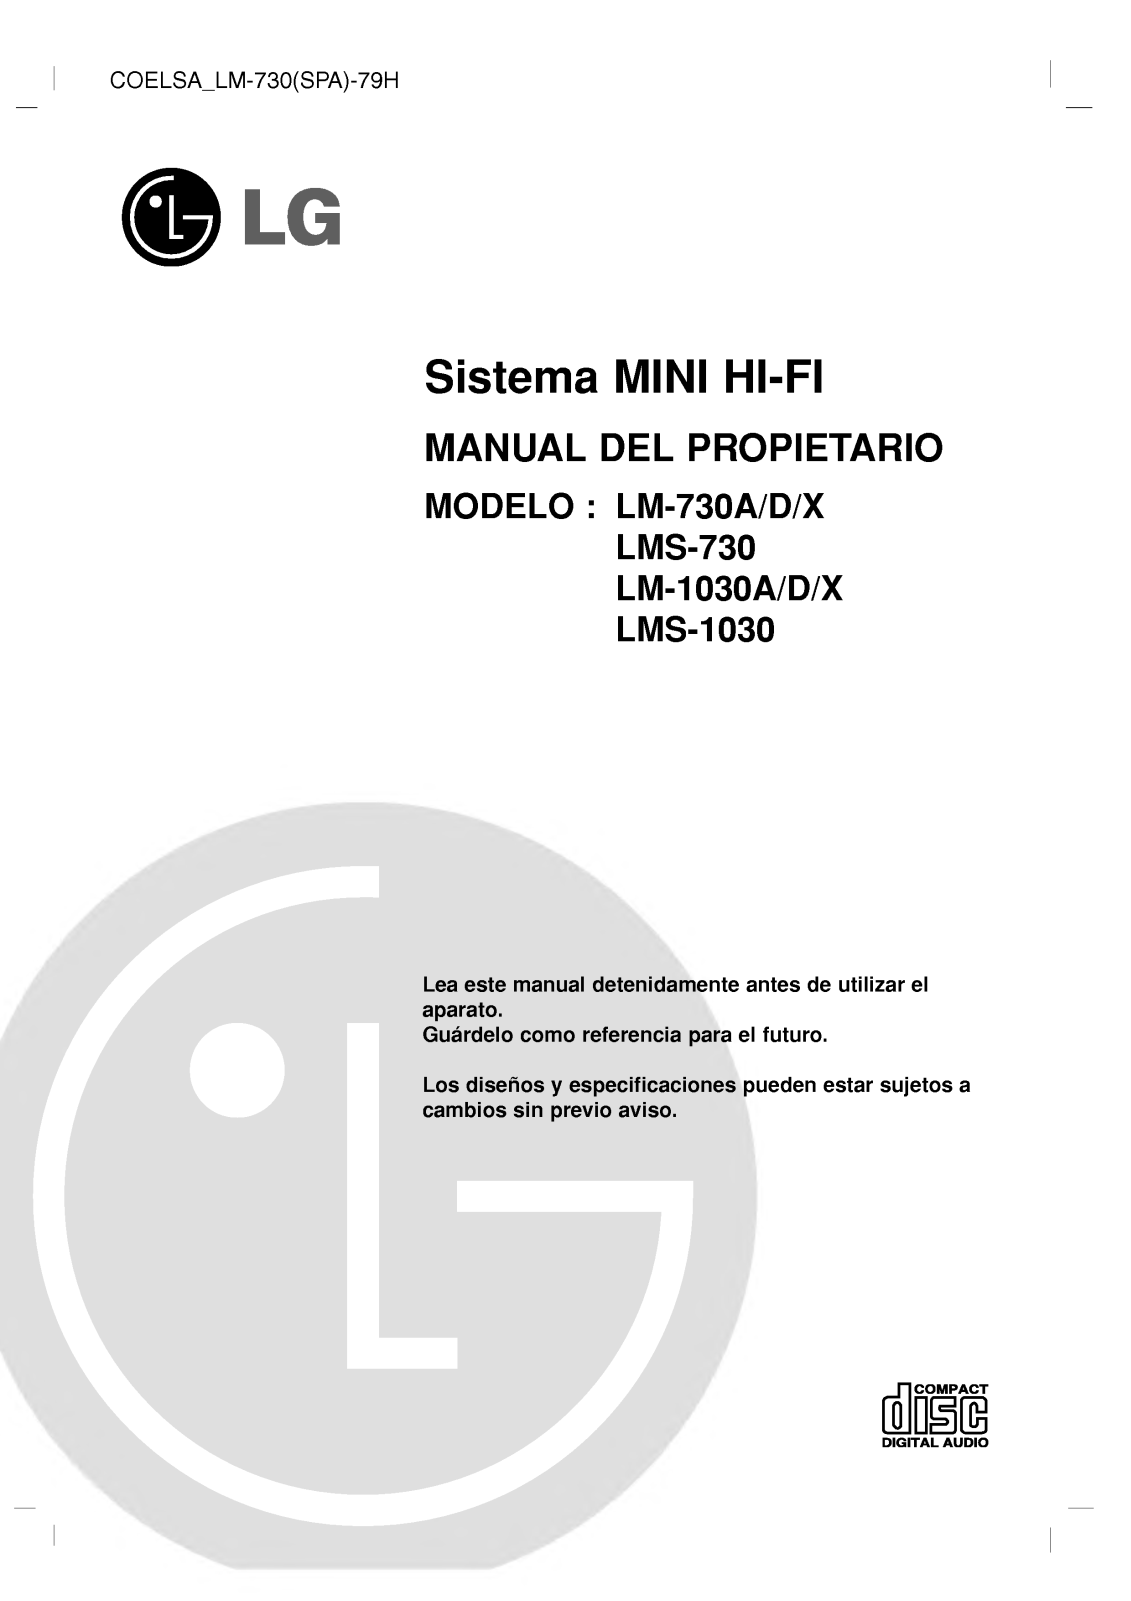 Lg LM-1030A, LM-1030, LM-1030D, LM-1030X, LM-730A User Manual